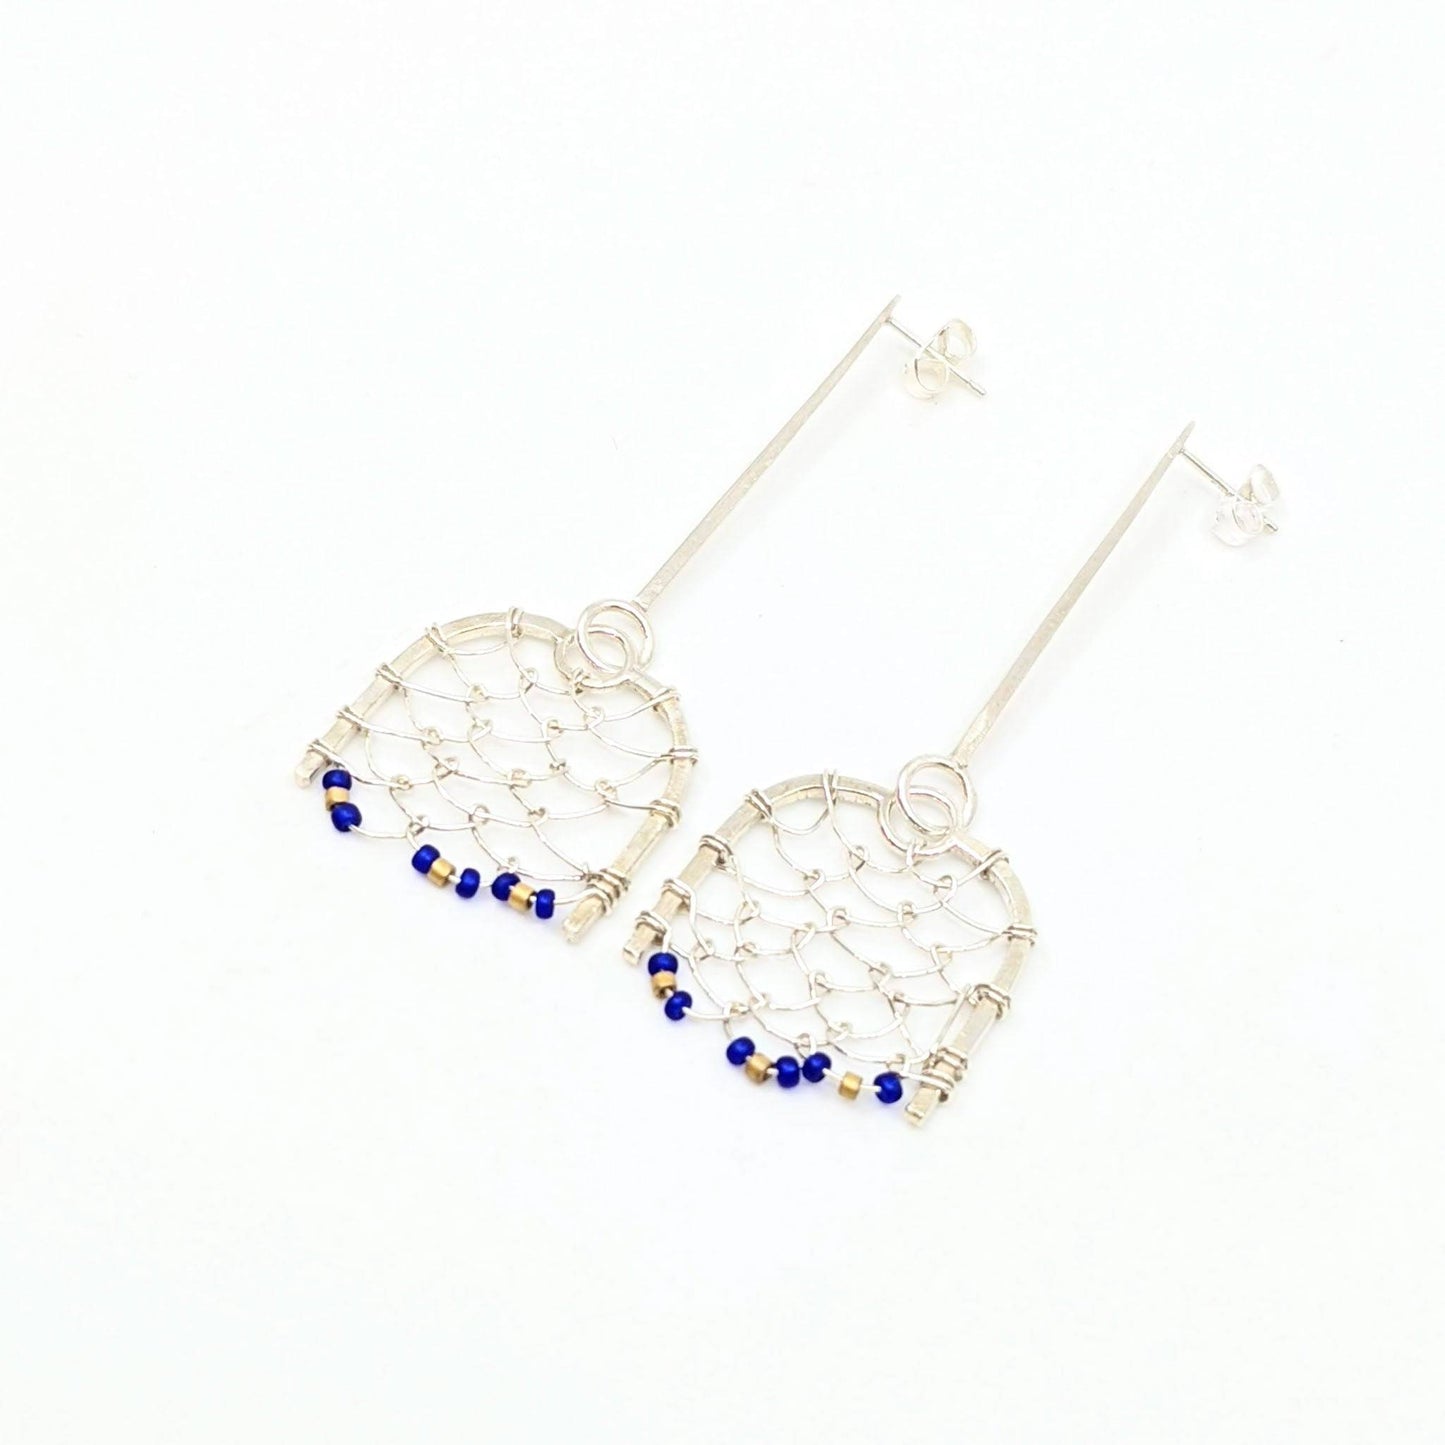 Netted Drop Earrings and Beading